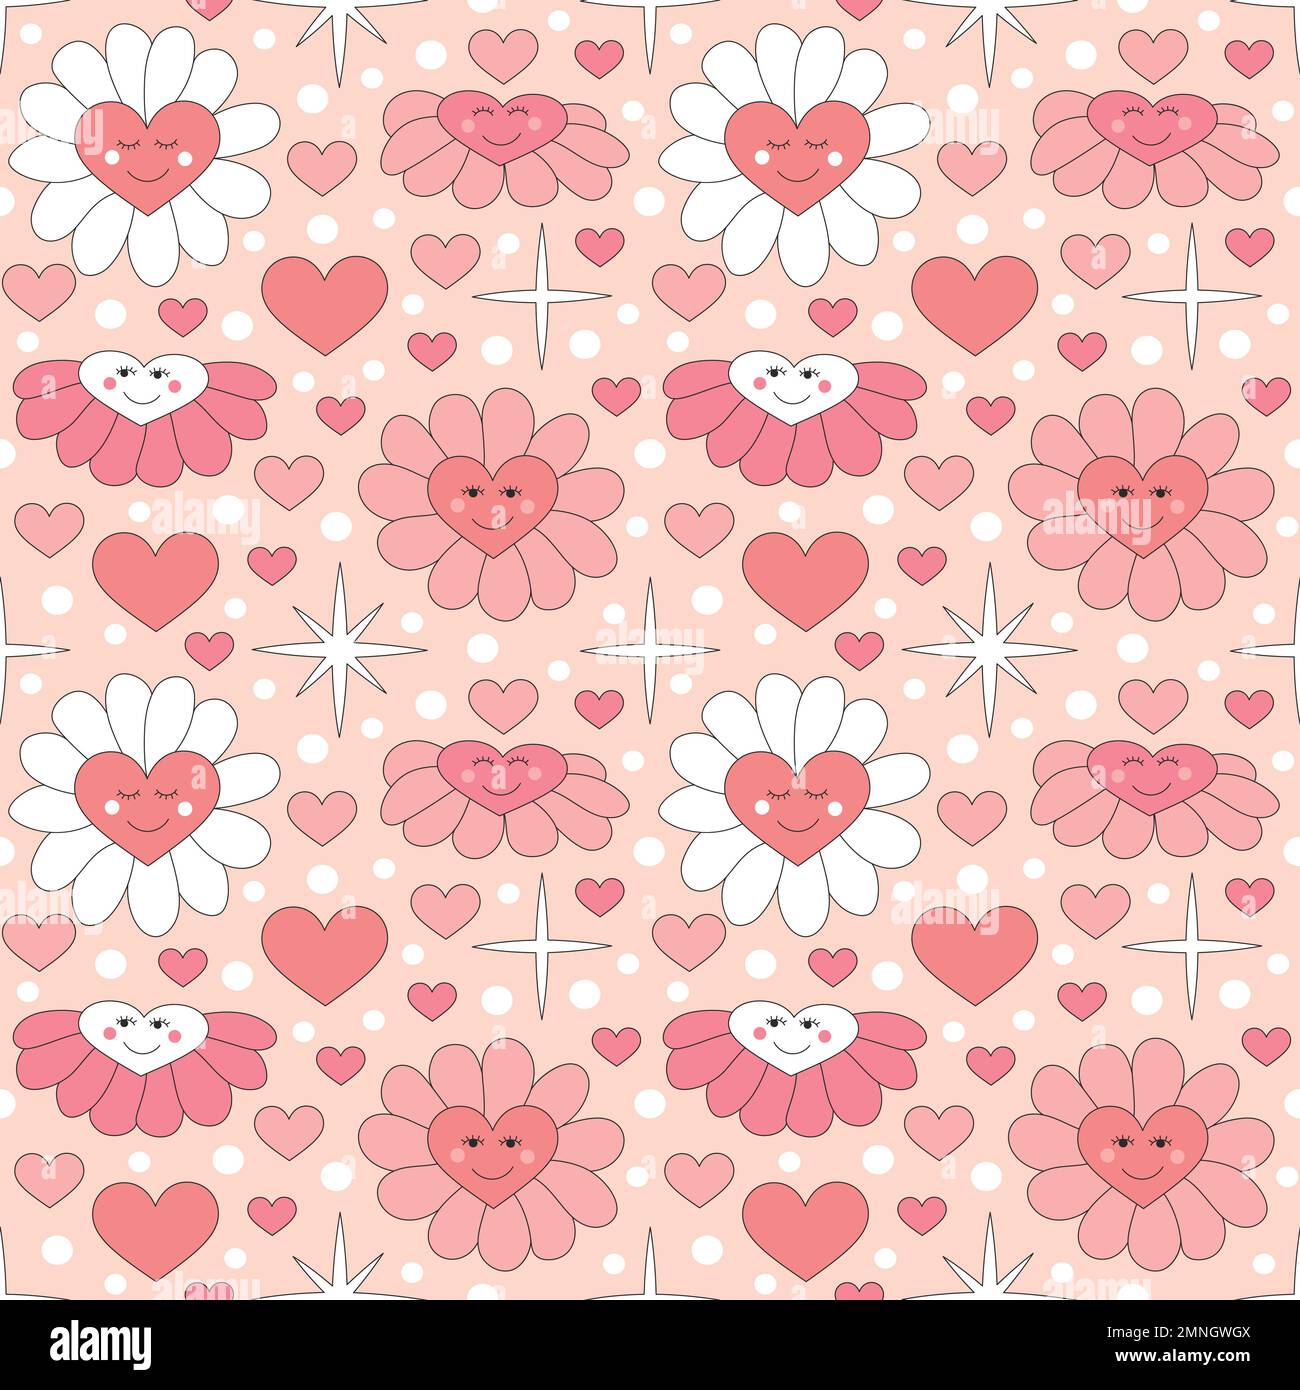 Seamless pattern with retro pink colors hearts. Stock Vector